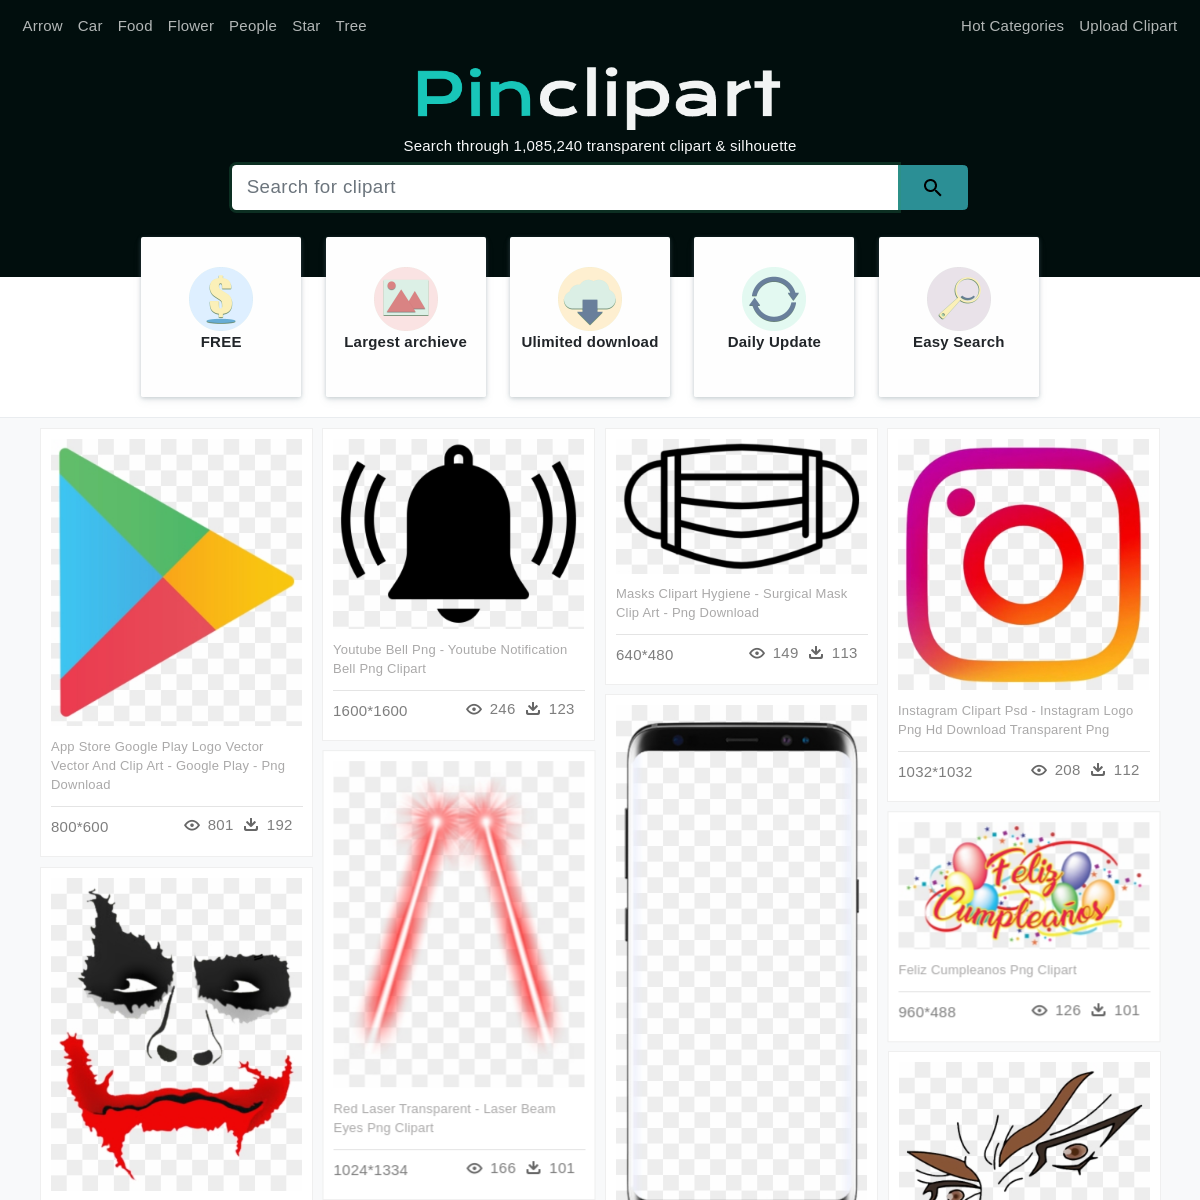 A complete backup of pinclipart.com